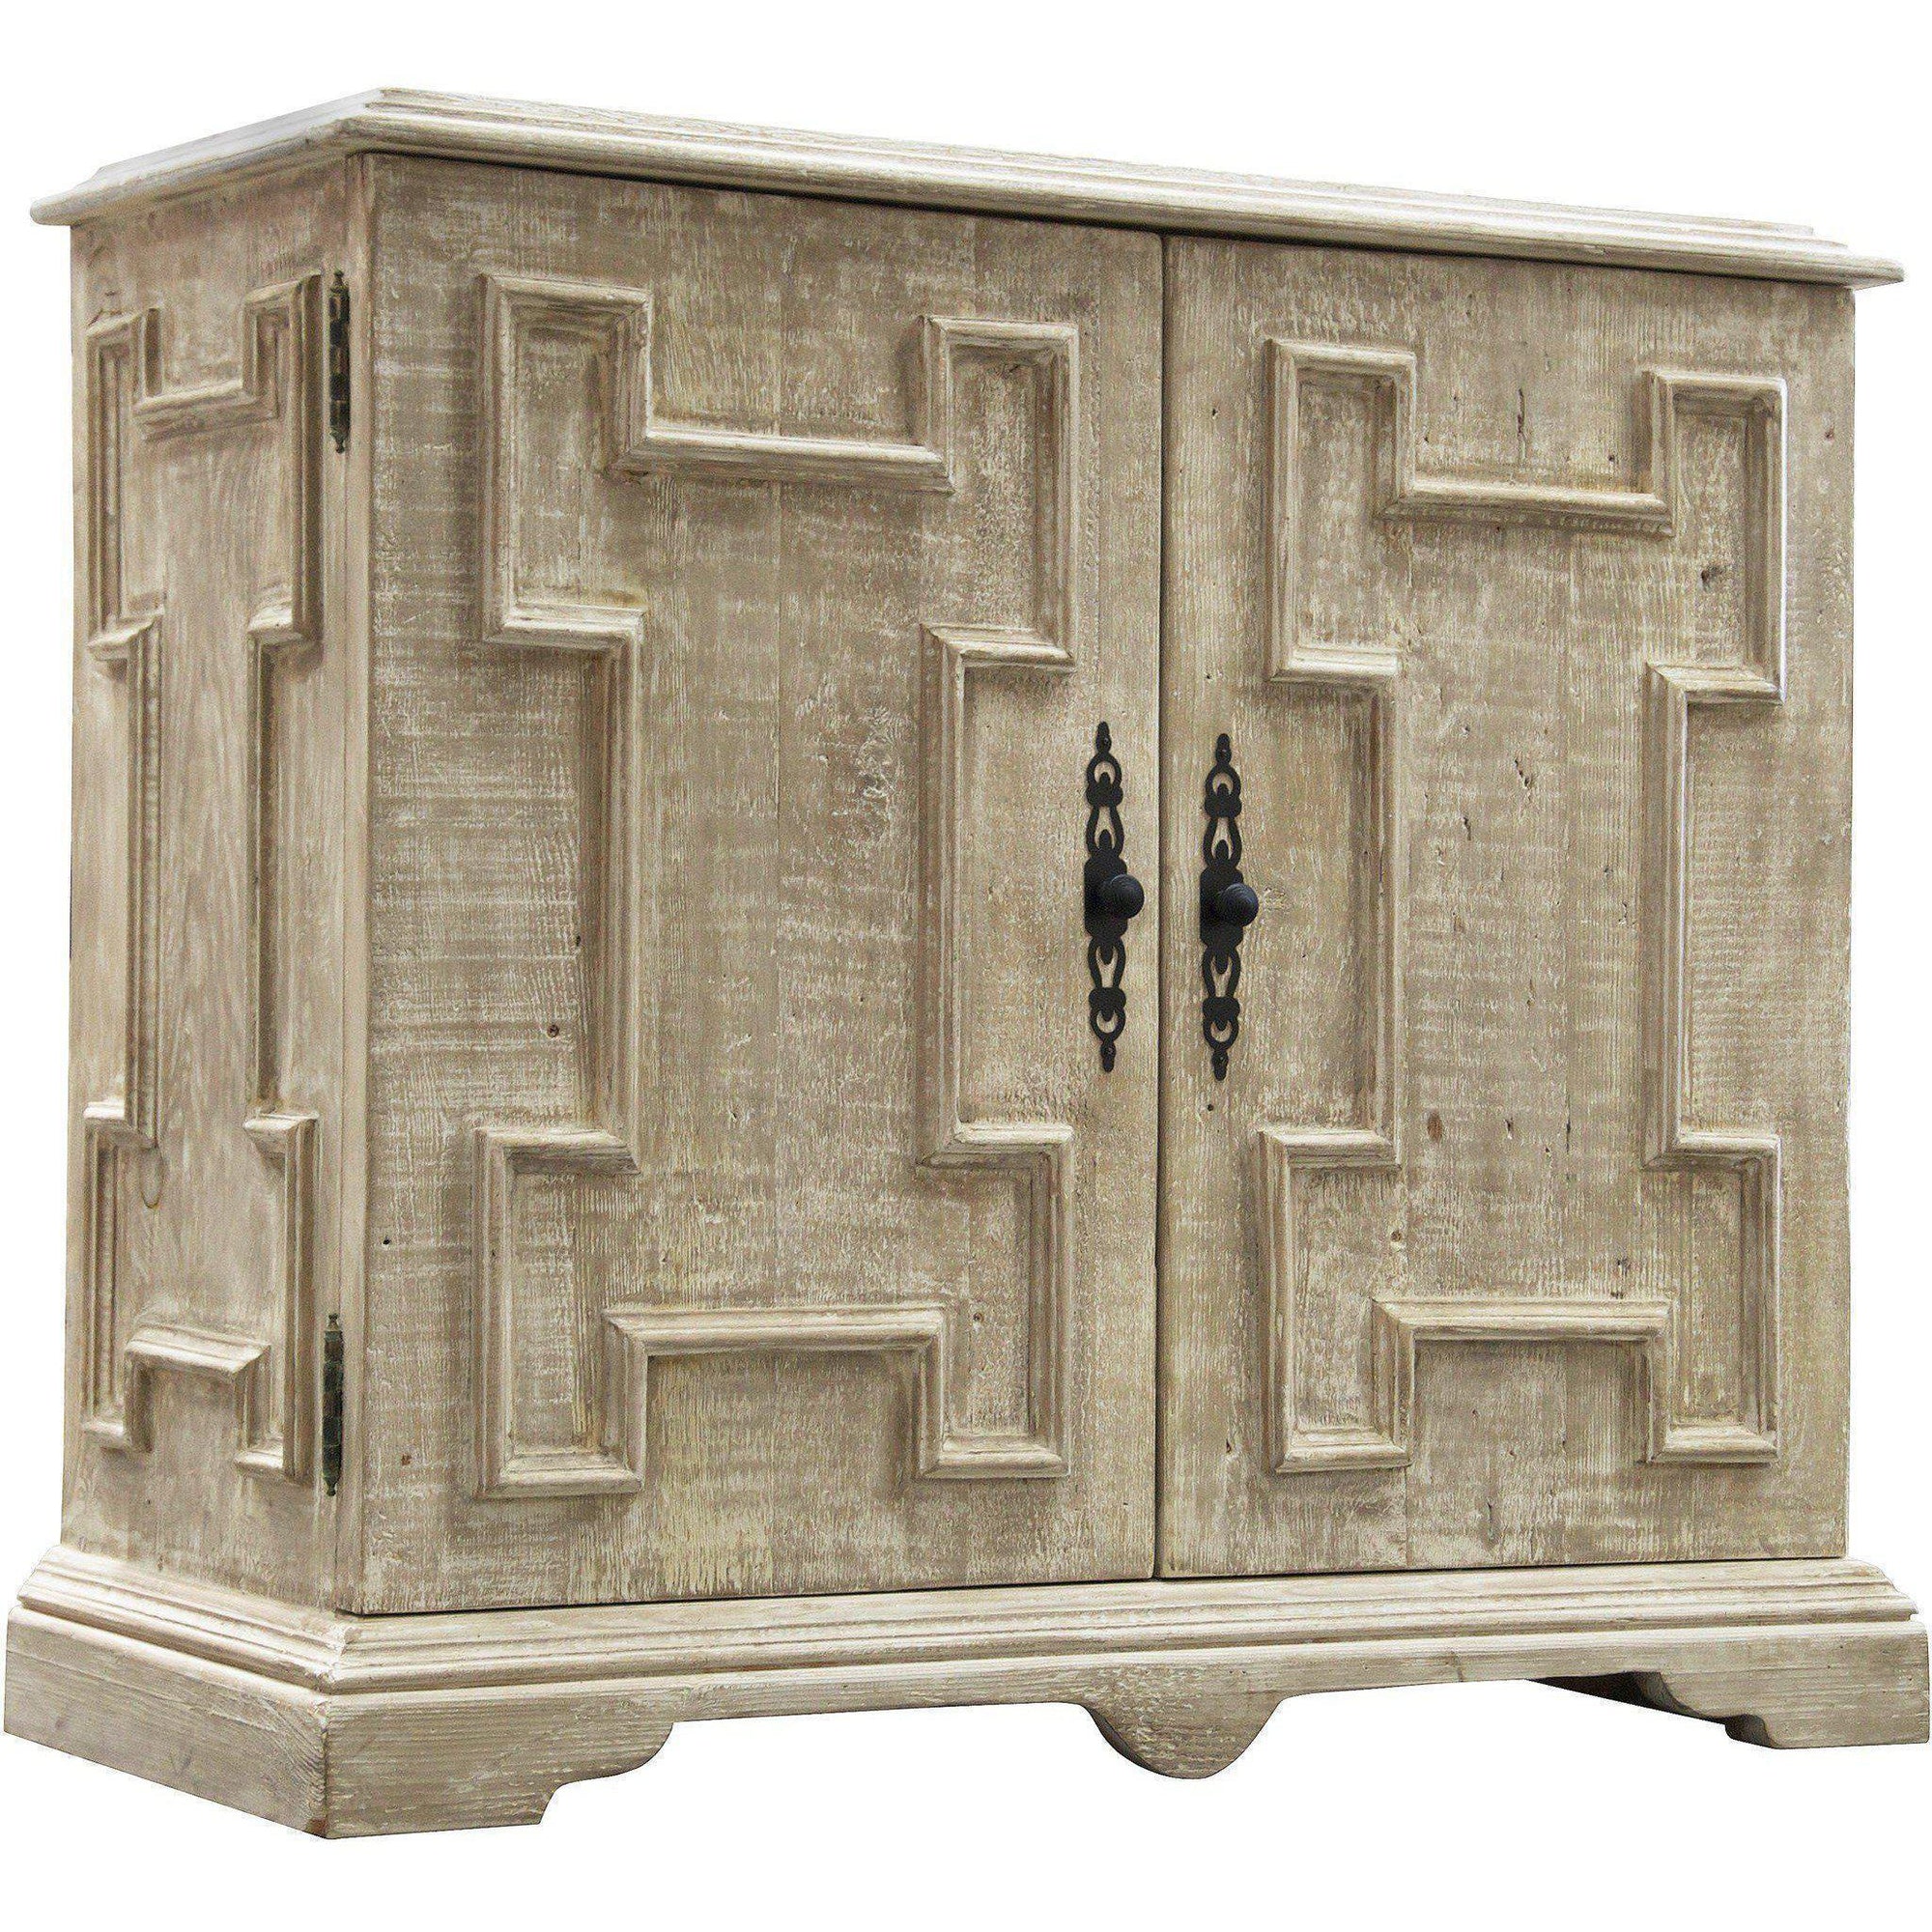 Shop Cfc Cabinets at Blue Hand Home